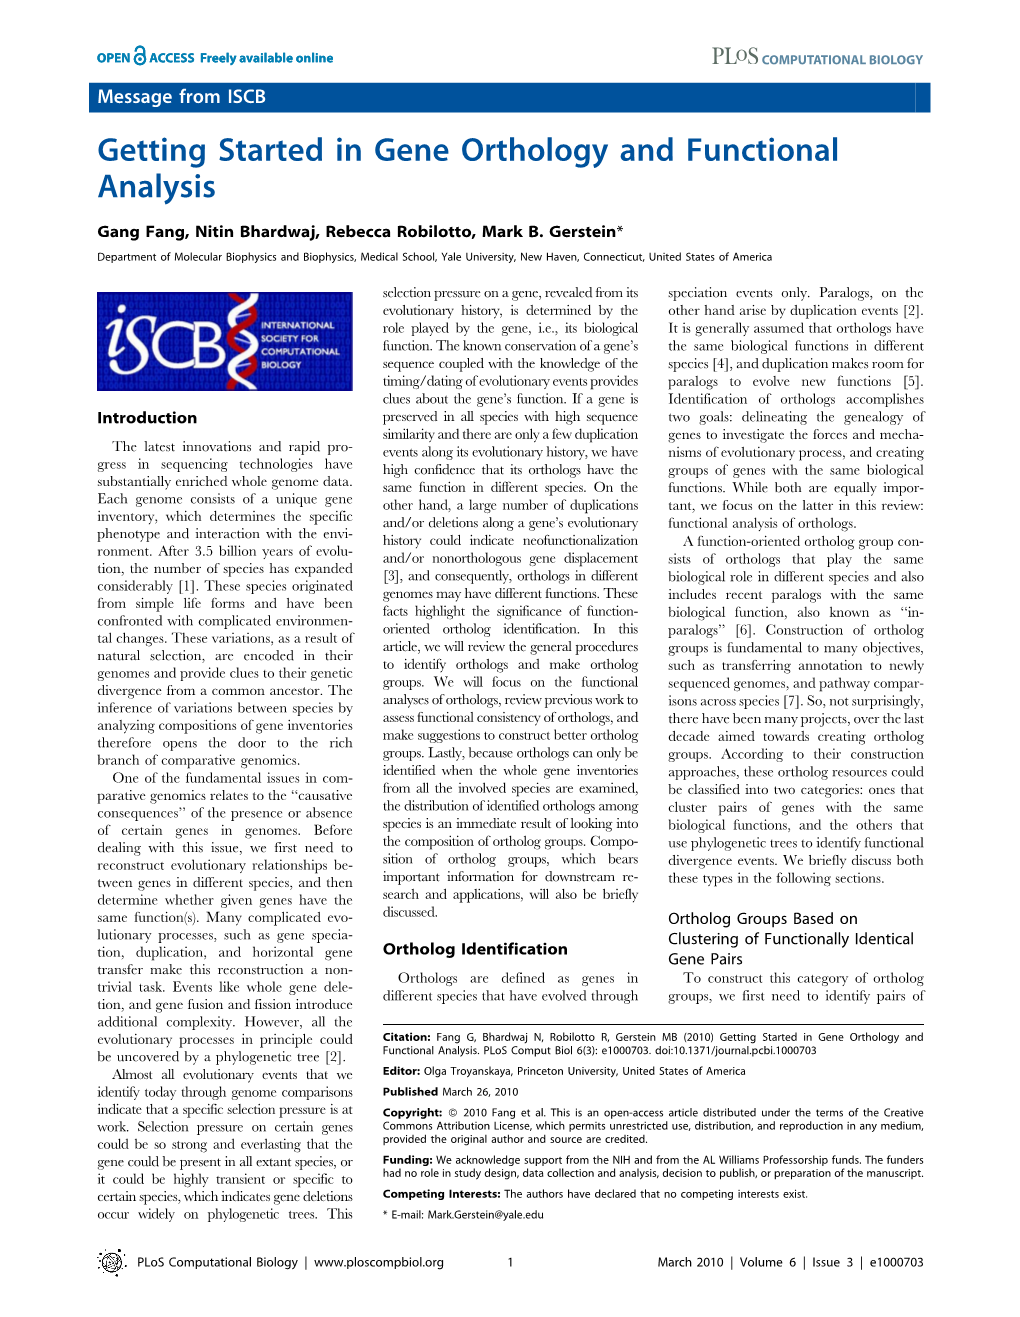 Getting Started in Gene Orthology and Functional Analysis